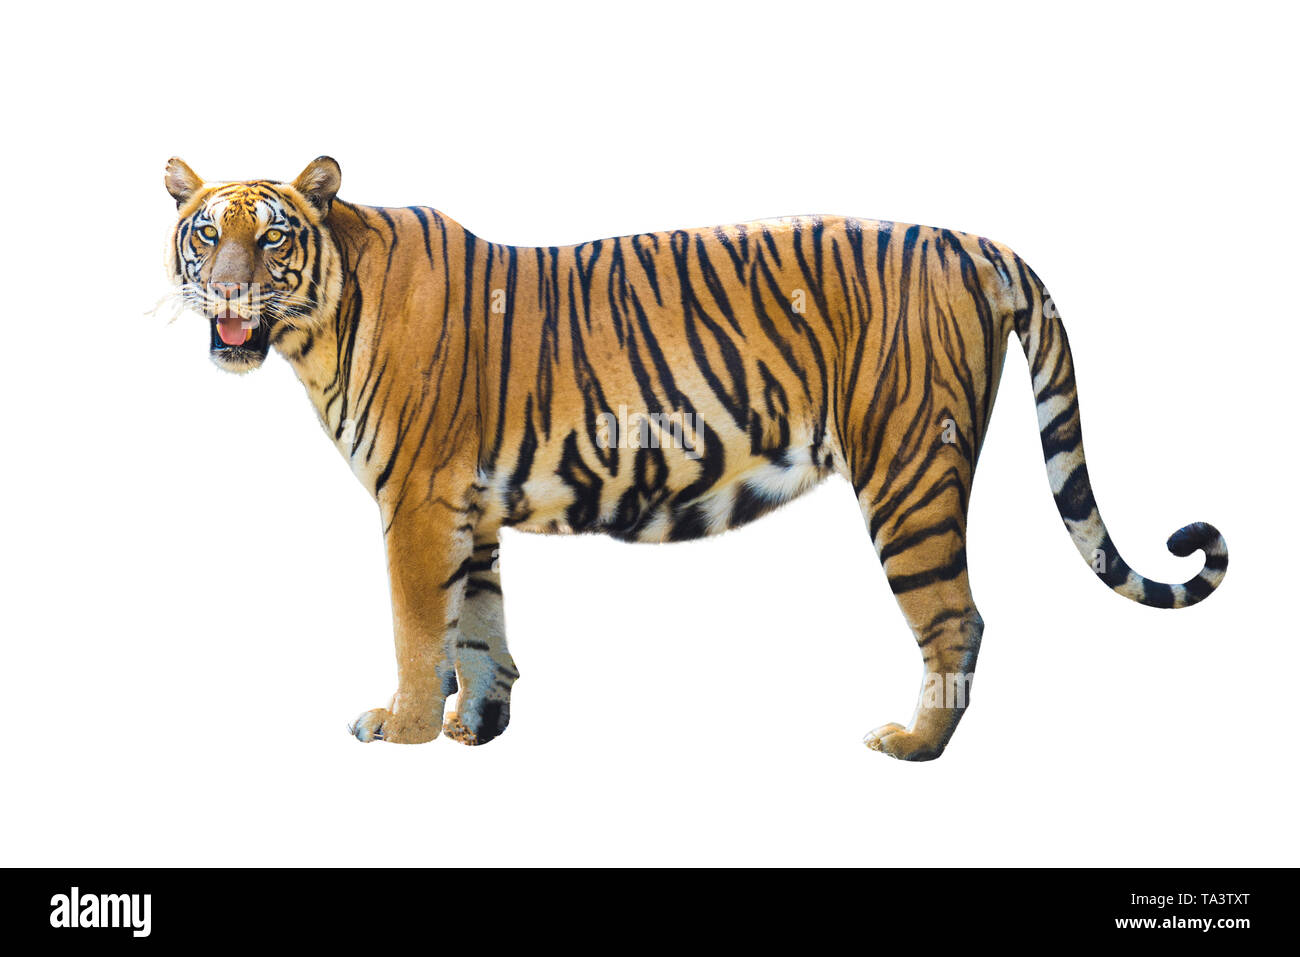 Tiger pictures on white background have different verbs. Stock Photo